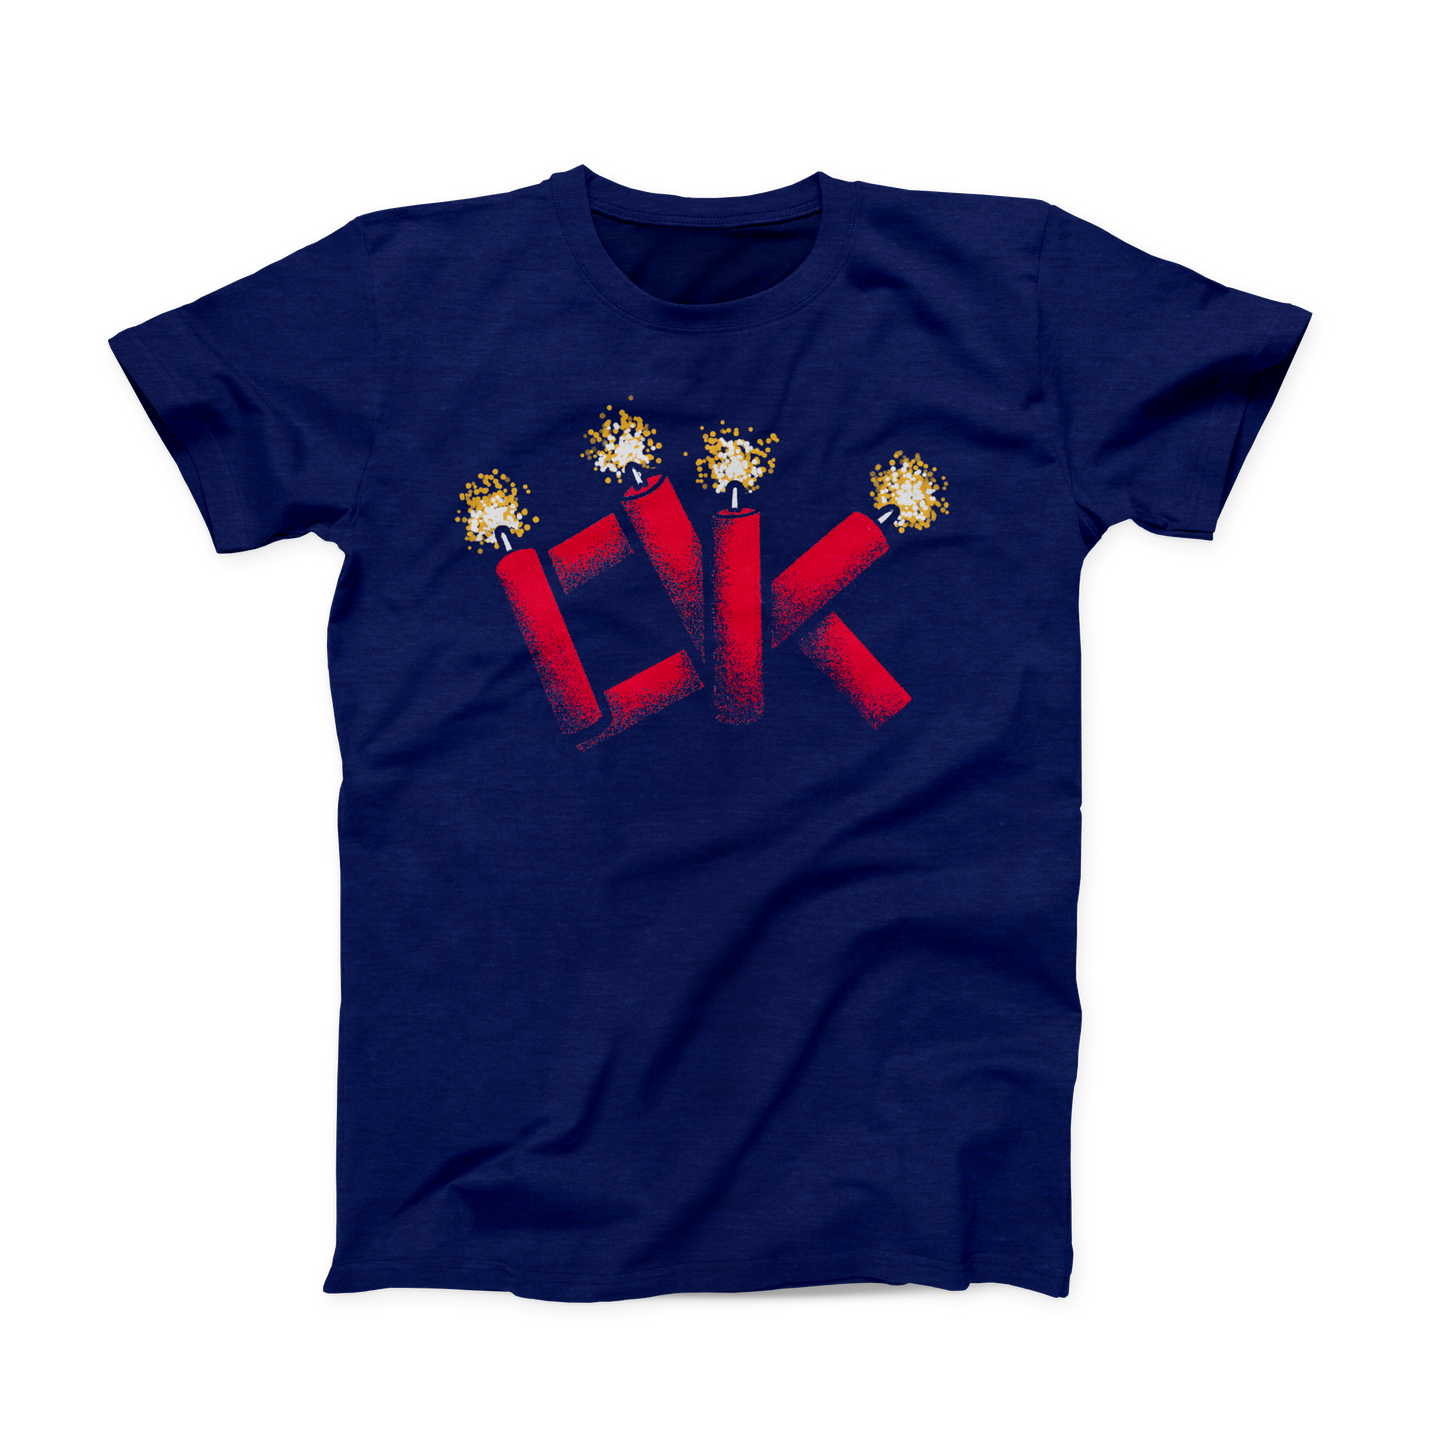 Navy colored Oklahoma T-shirt. Screen printed across the chest is "OK" made out of red firecrackers, the tops of which are lit in a yellow and white spark.